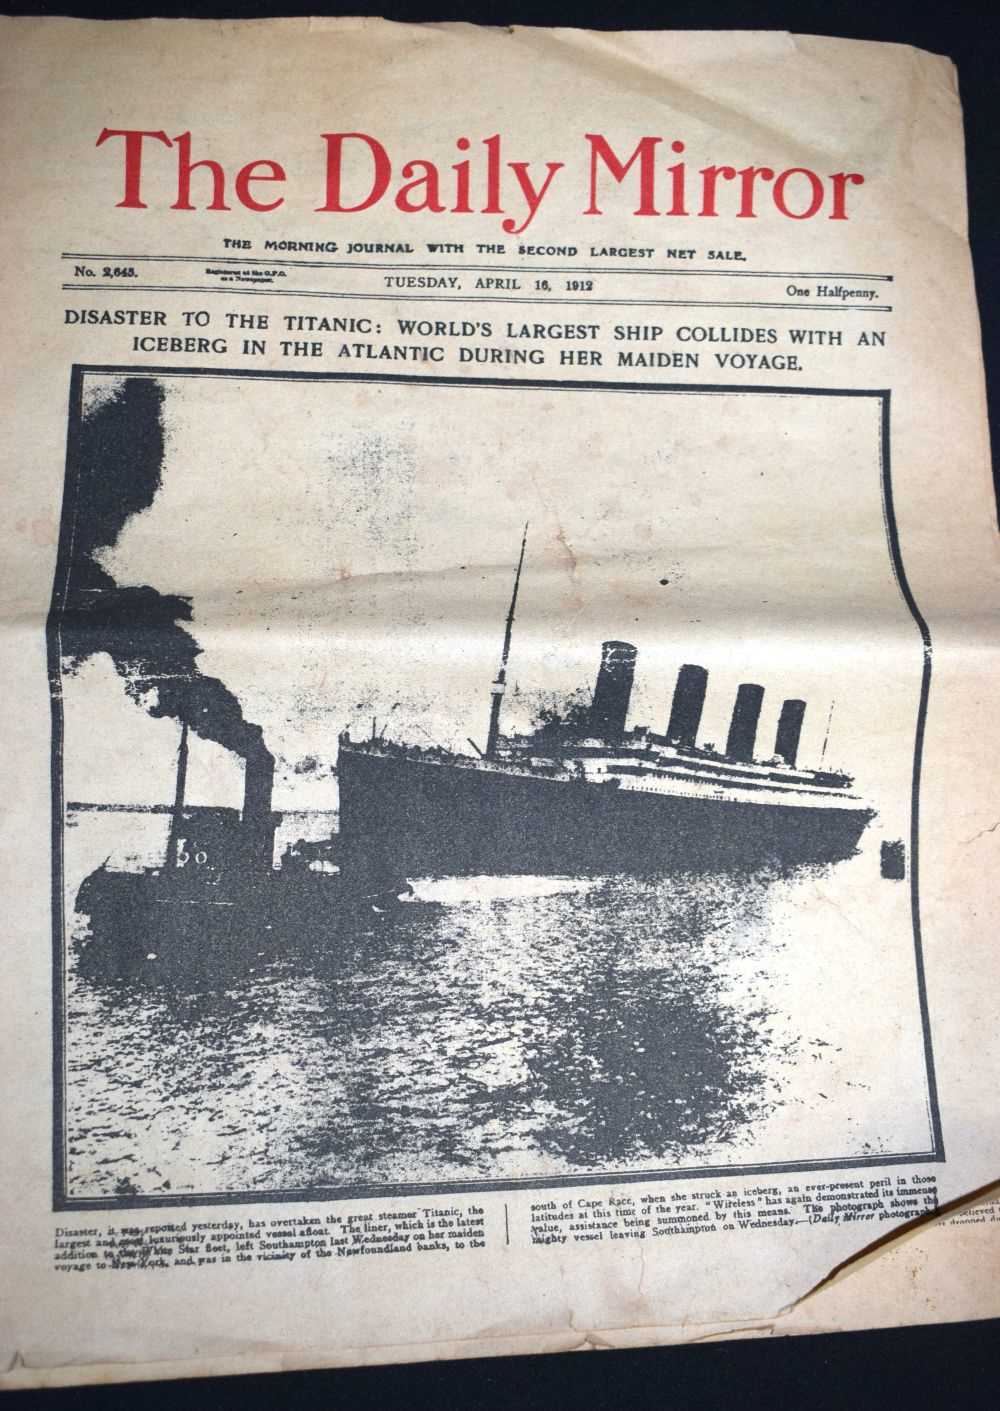 A collection of Titanic ephemera copy of The Daily Mirror, Poster, White Star line advertisement, - Image 6 of 14